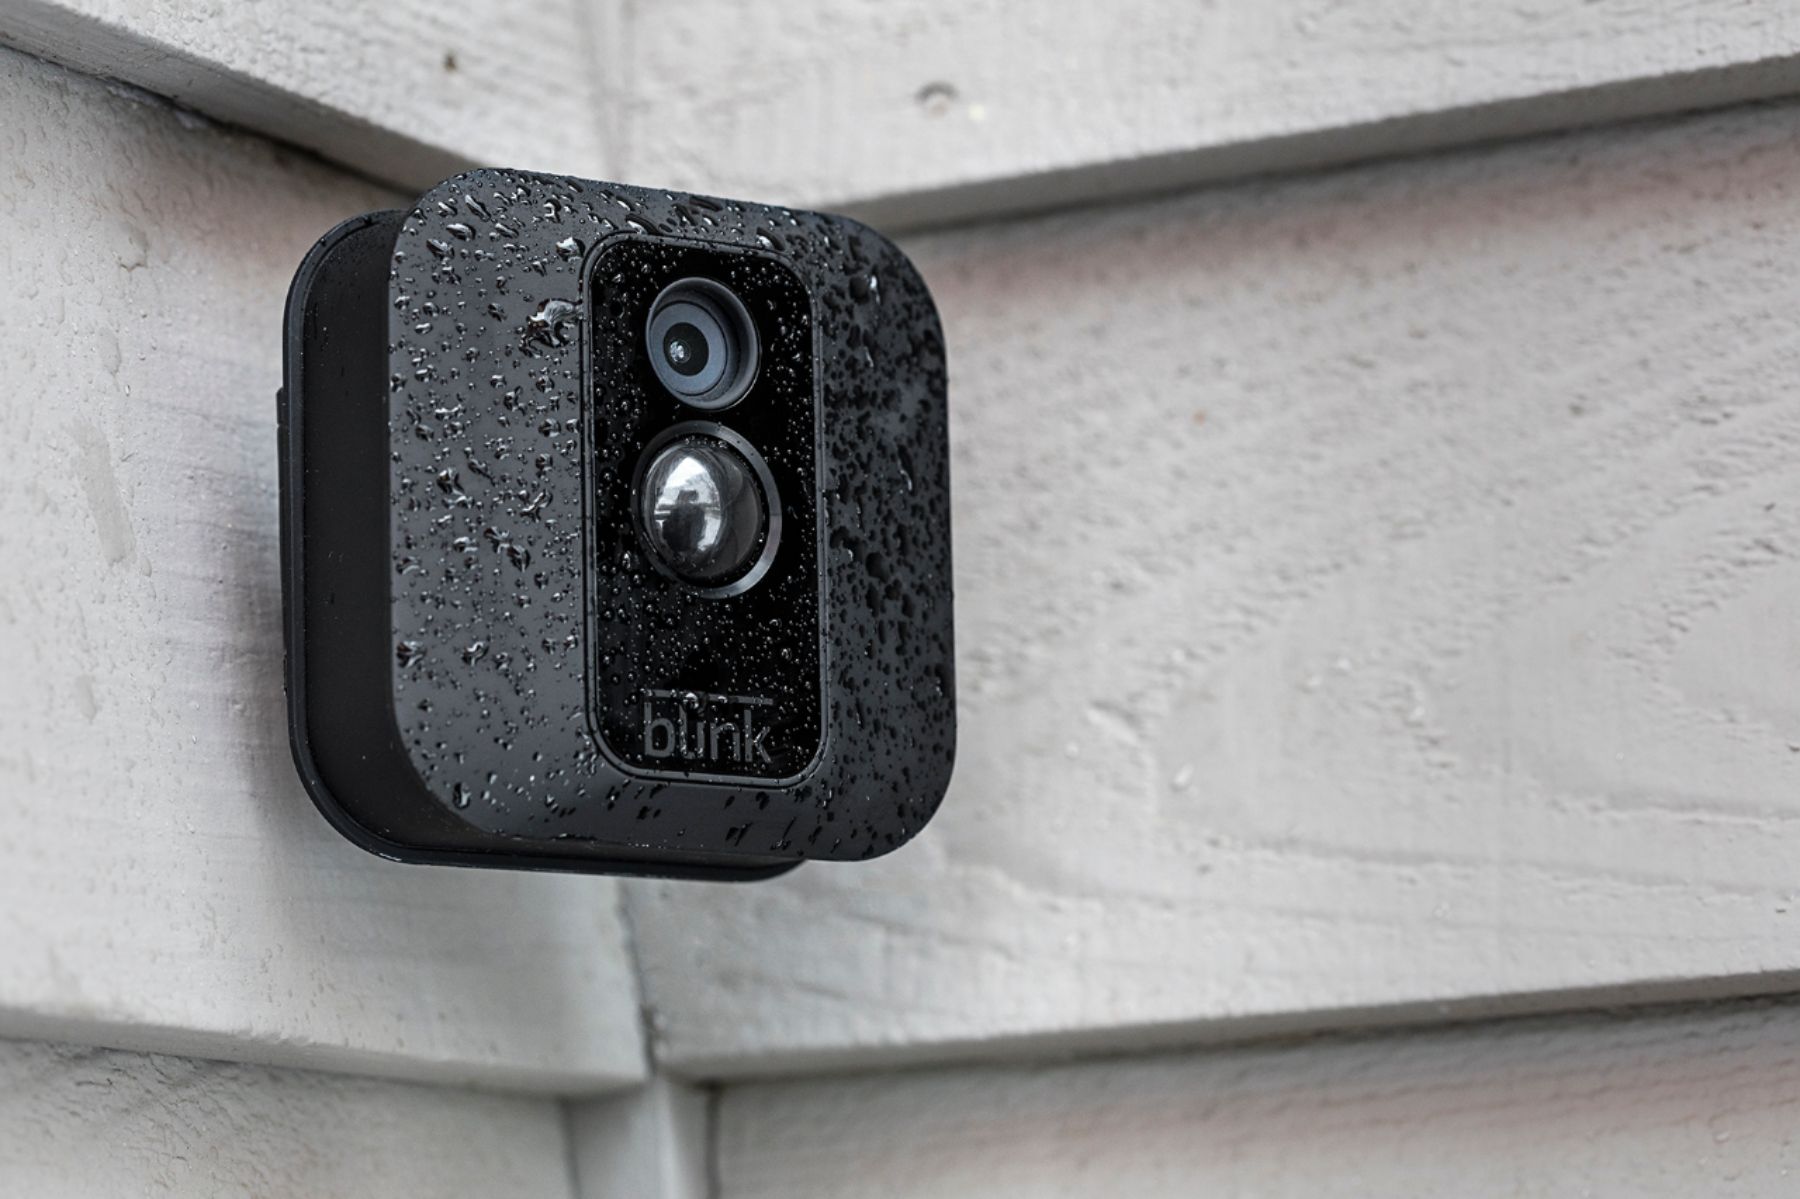 Add-On Blink XT Indoor/Outdoor Home Security Camera for Existing Blink Systems 